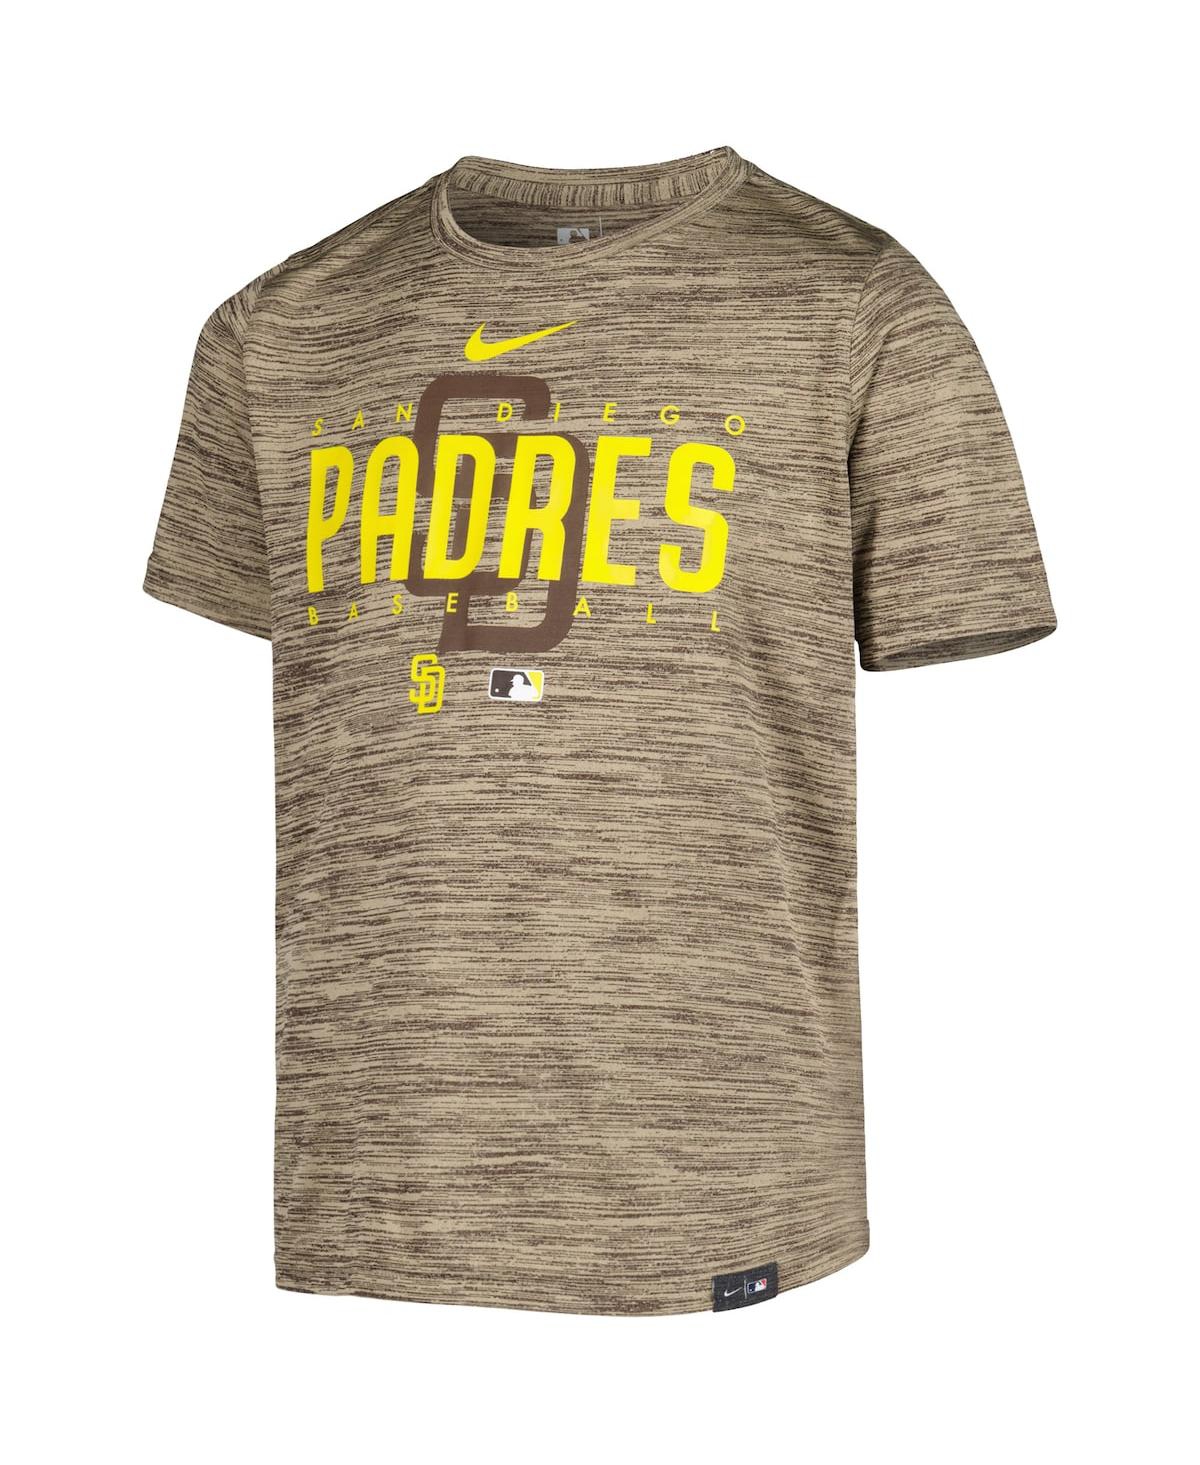 padres nike youth